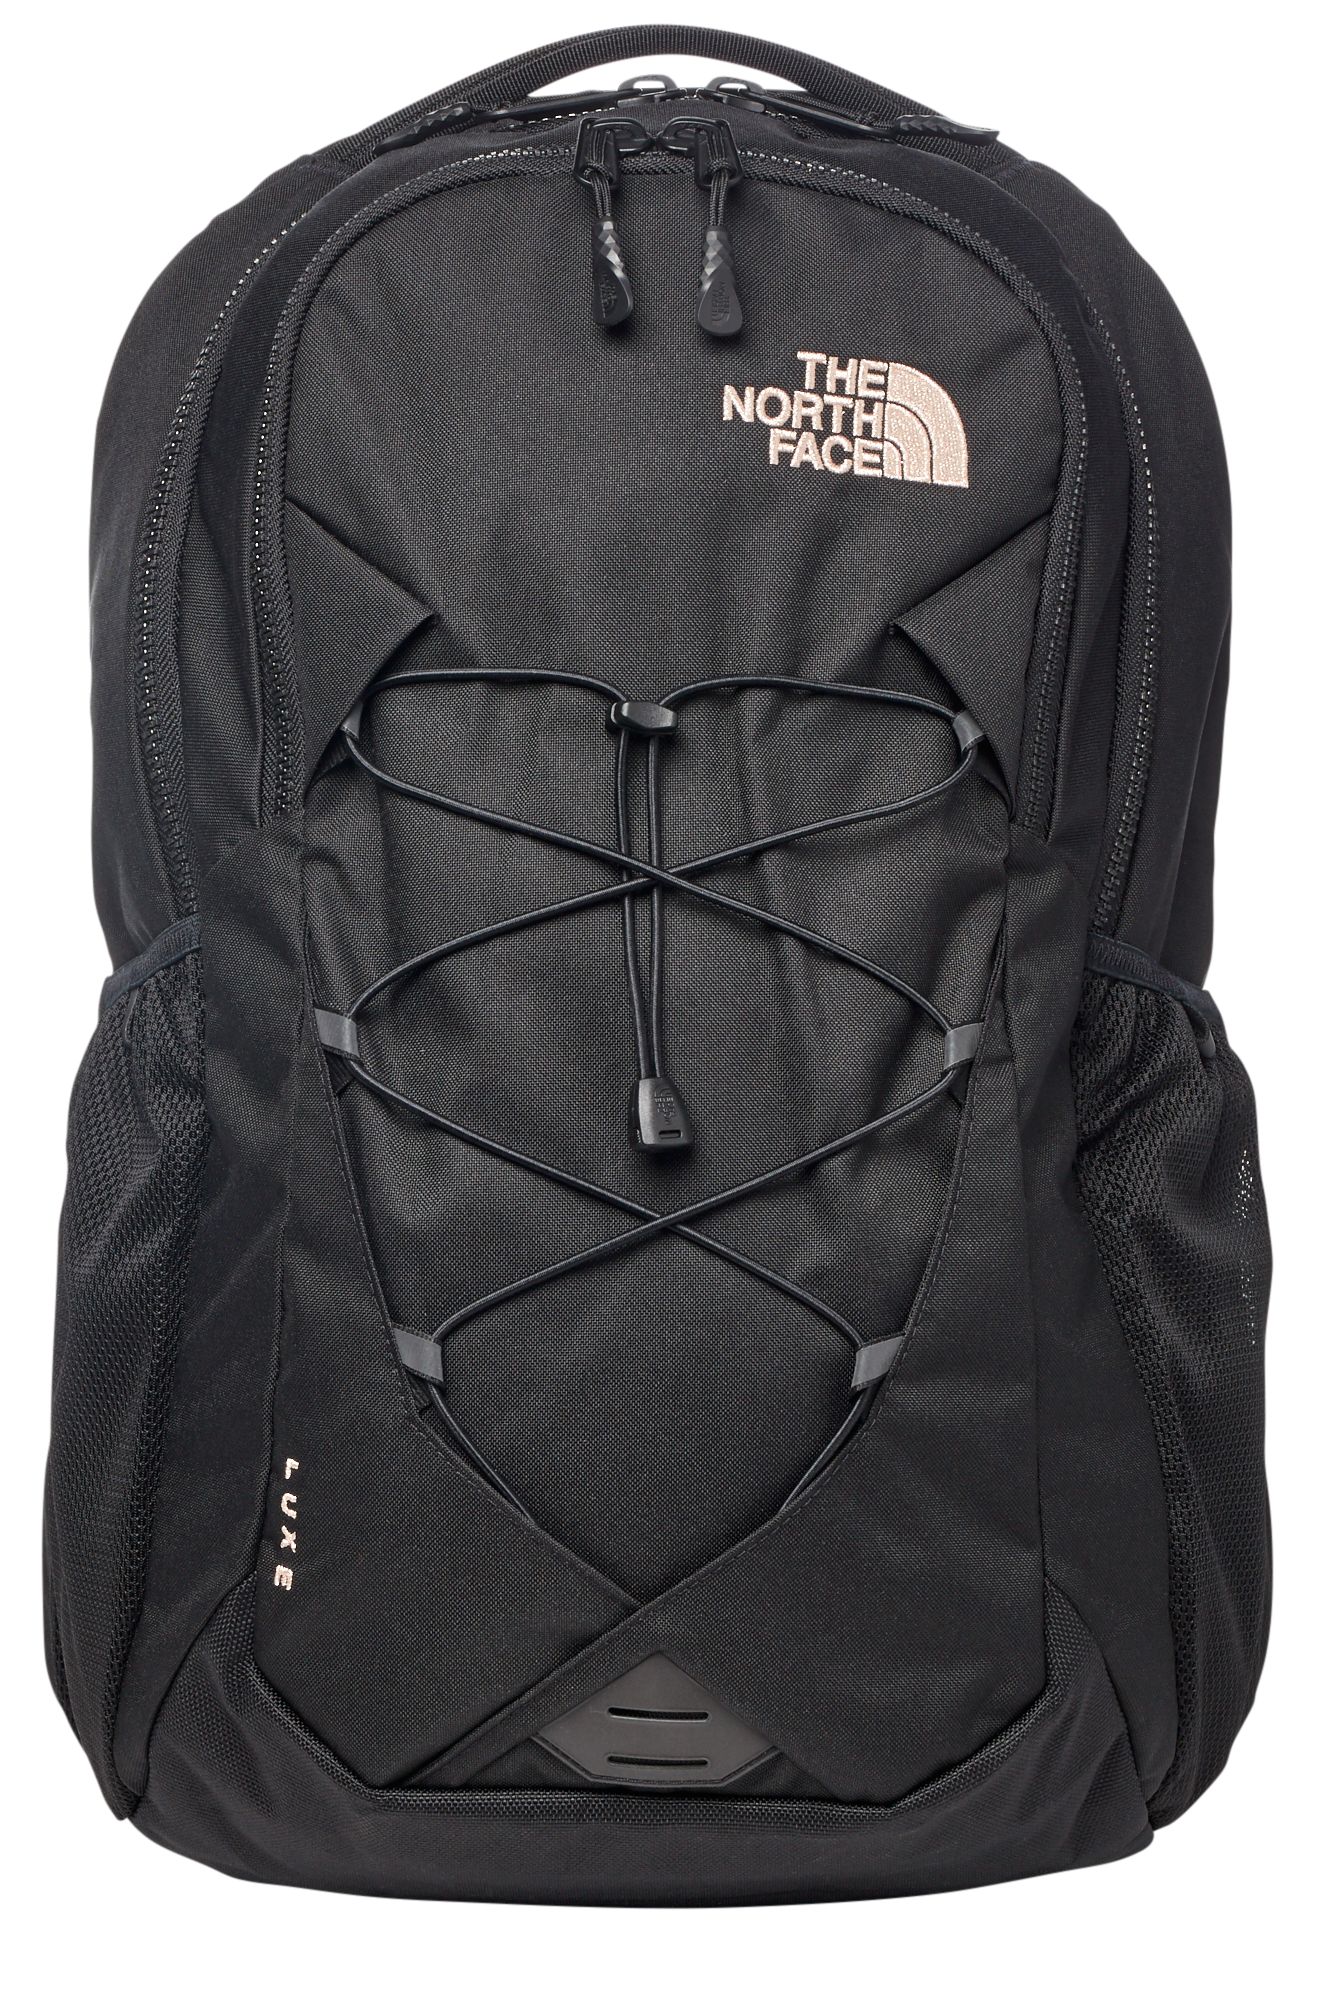 The North Face Backpacks | Free 